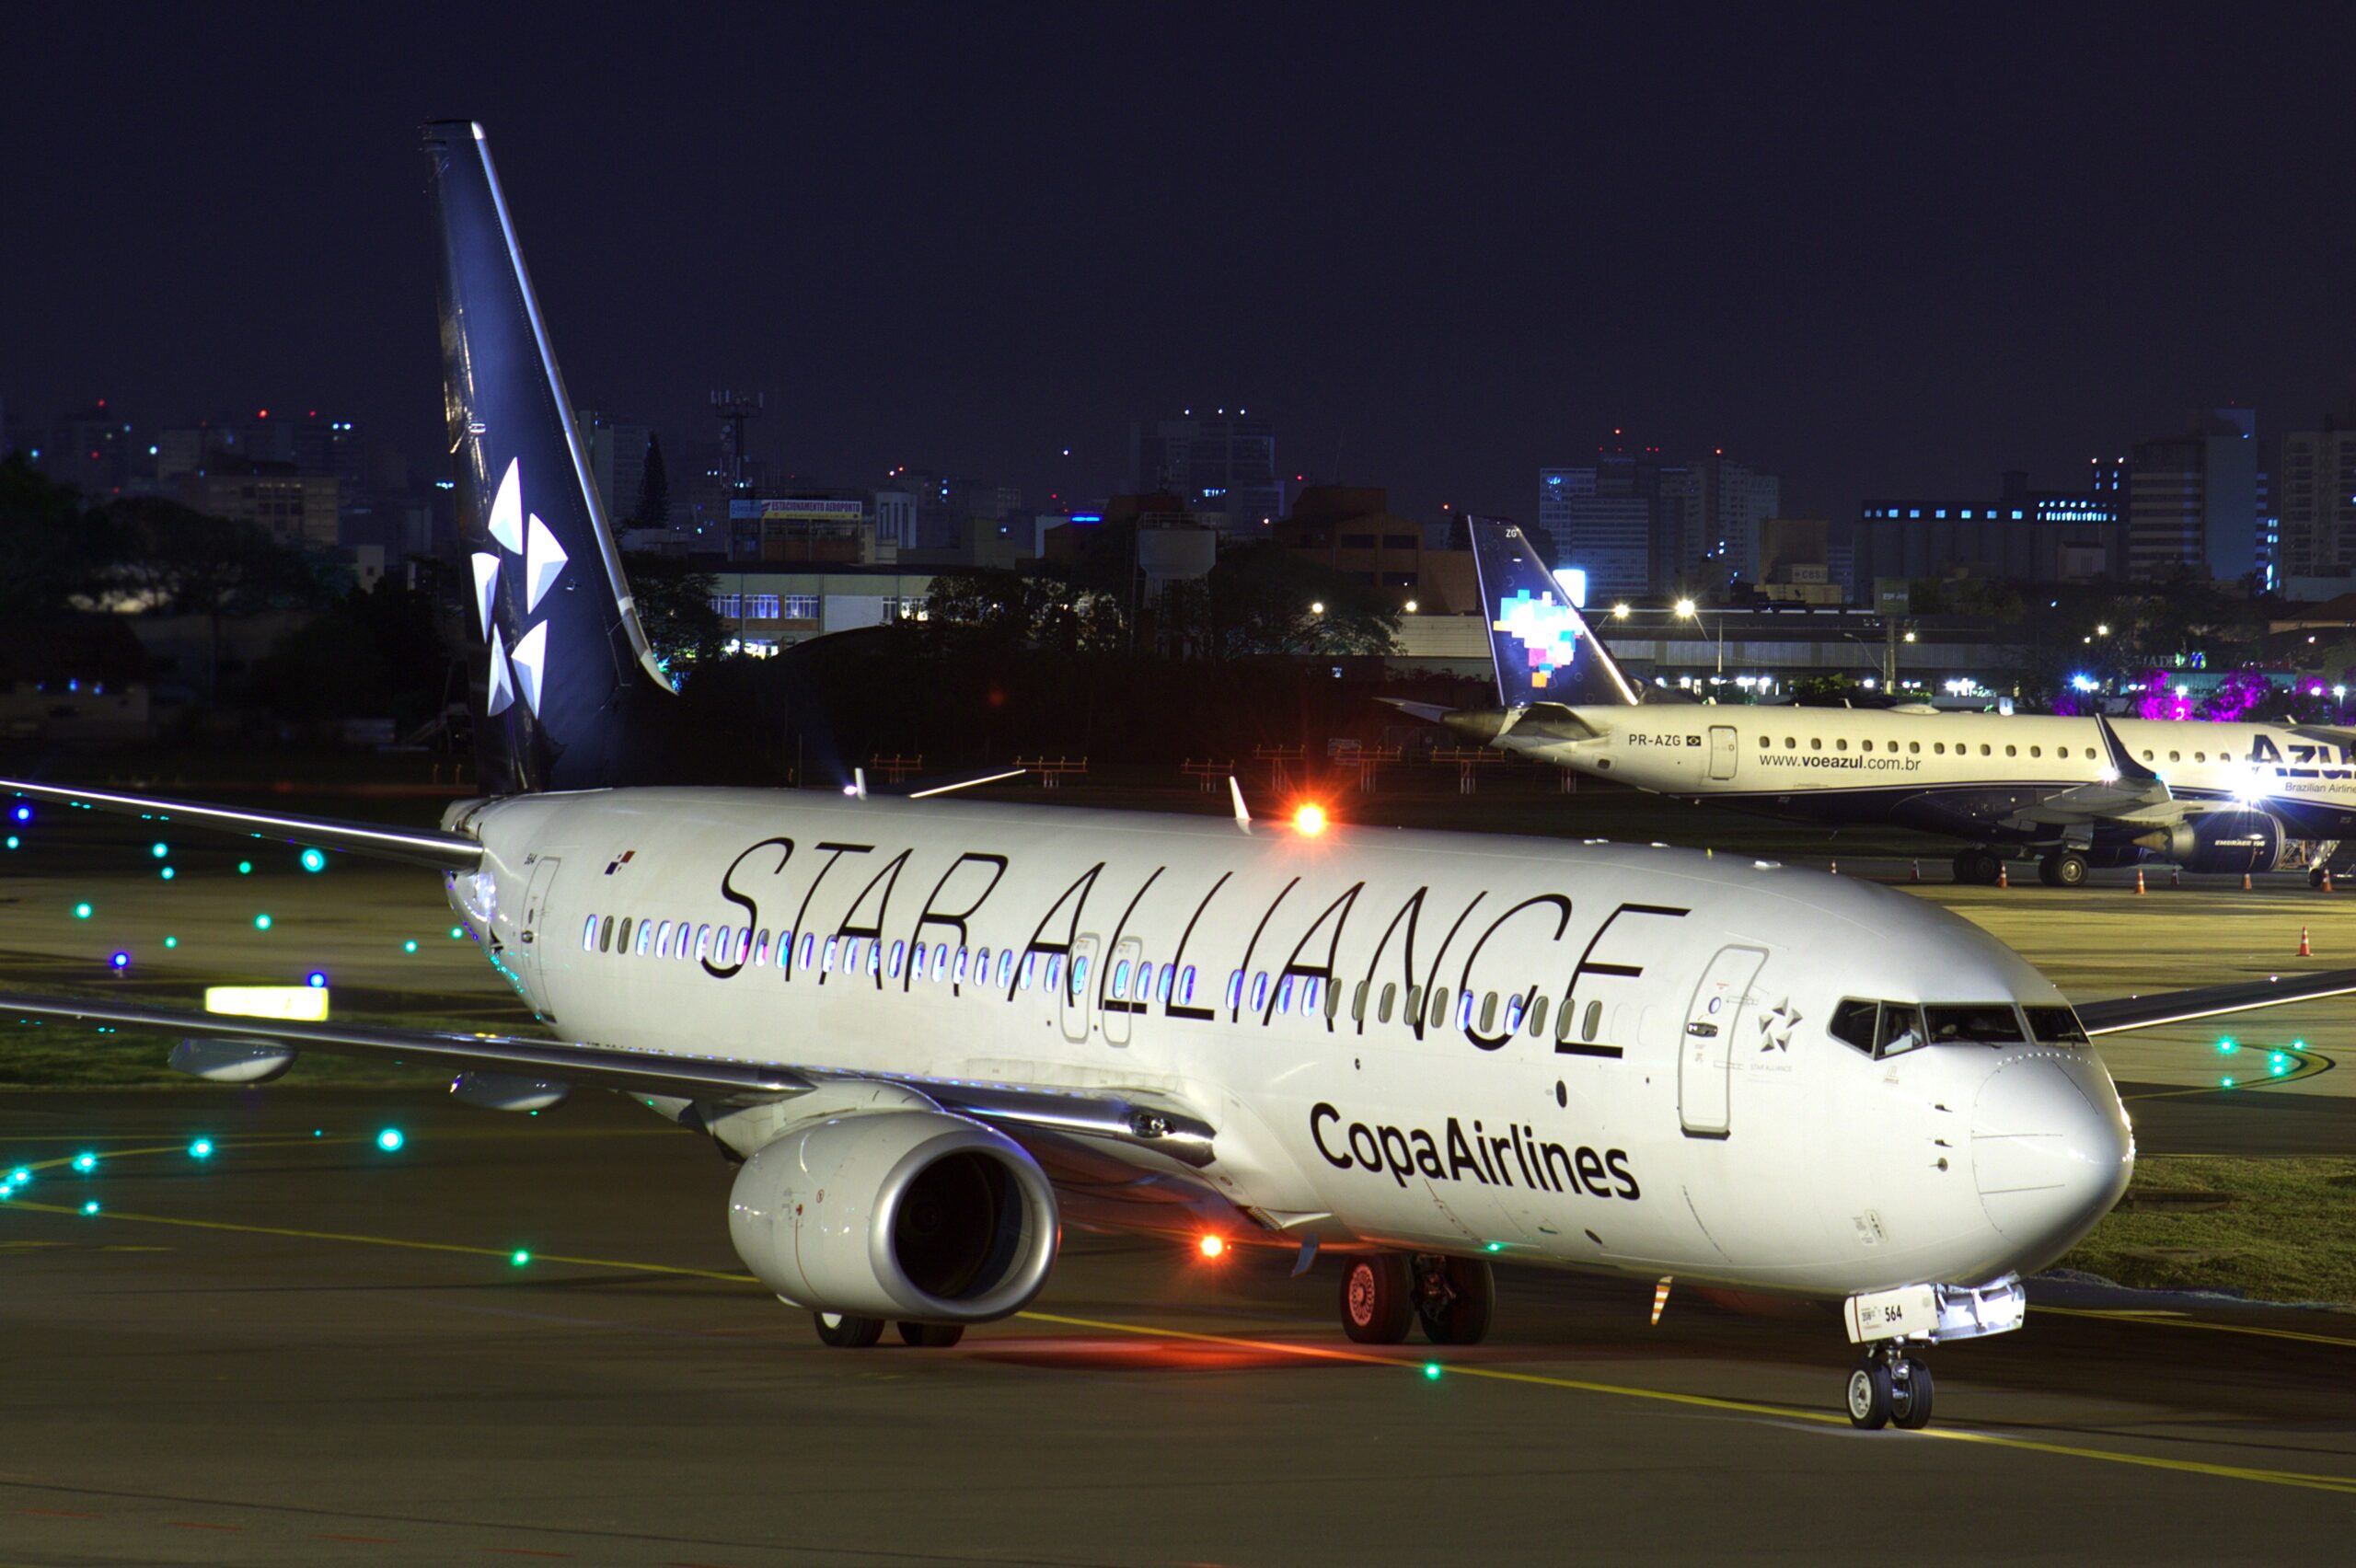 By Rafael Luiz Canossa - 737-800 COPA AIRLINES POA, CC BY-SA 2.0, https://commons.wikimedia.org/w/index.php?curid=55658422